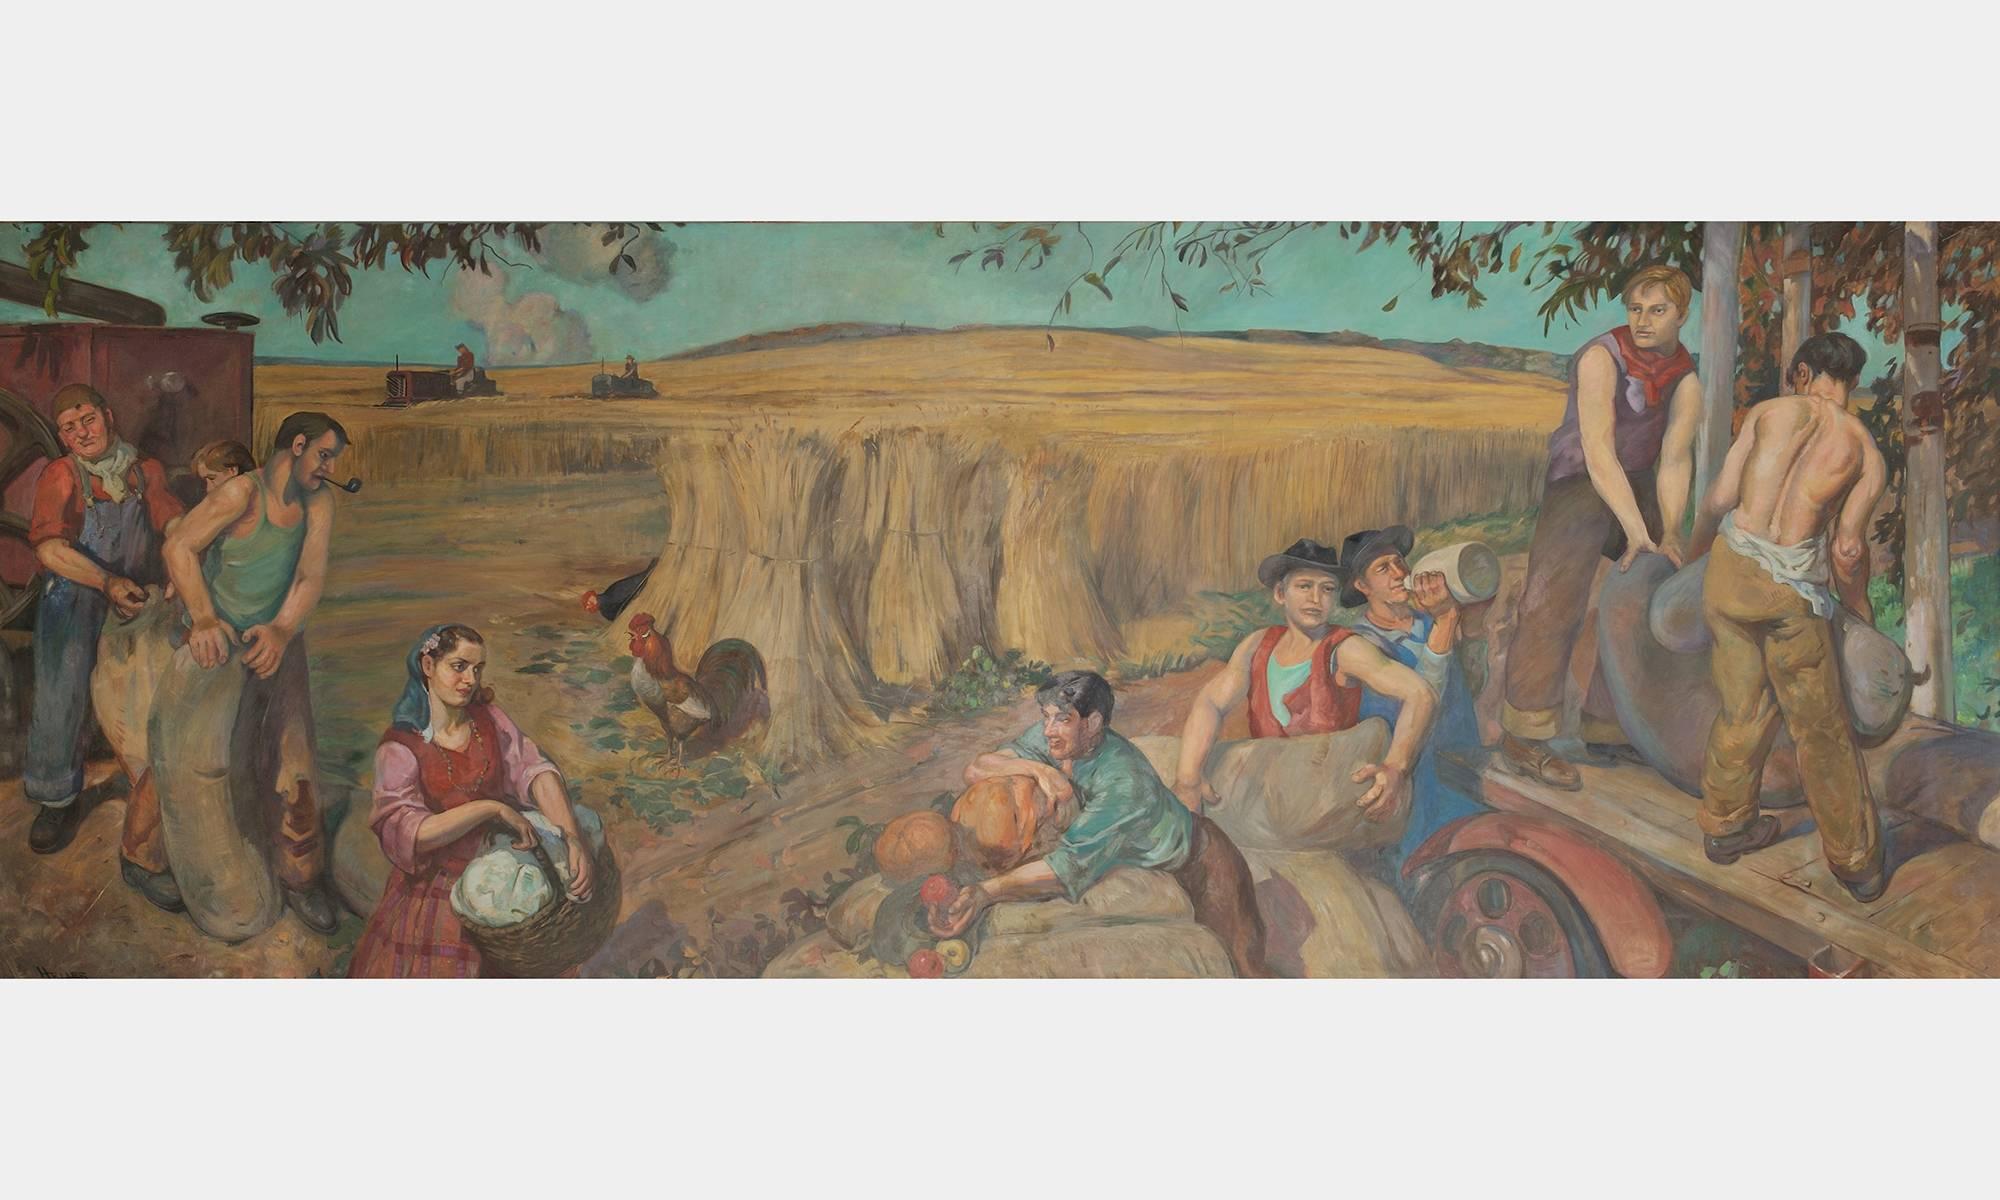 Large-scale oil on canvas painting depicting workers harvesting wheat. Six murals were made in total portraying idealized scenes of the American industry in progress. The paintings lined the walls of the Bank of St. Louis from 1935-2009.